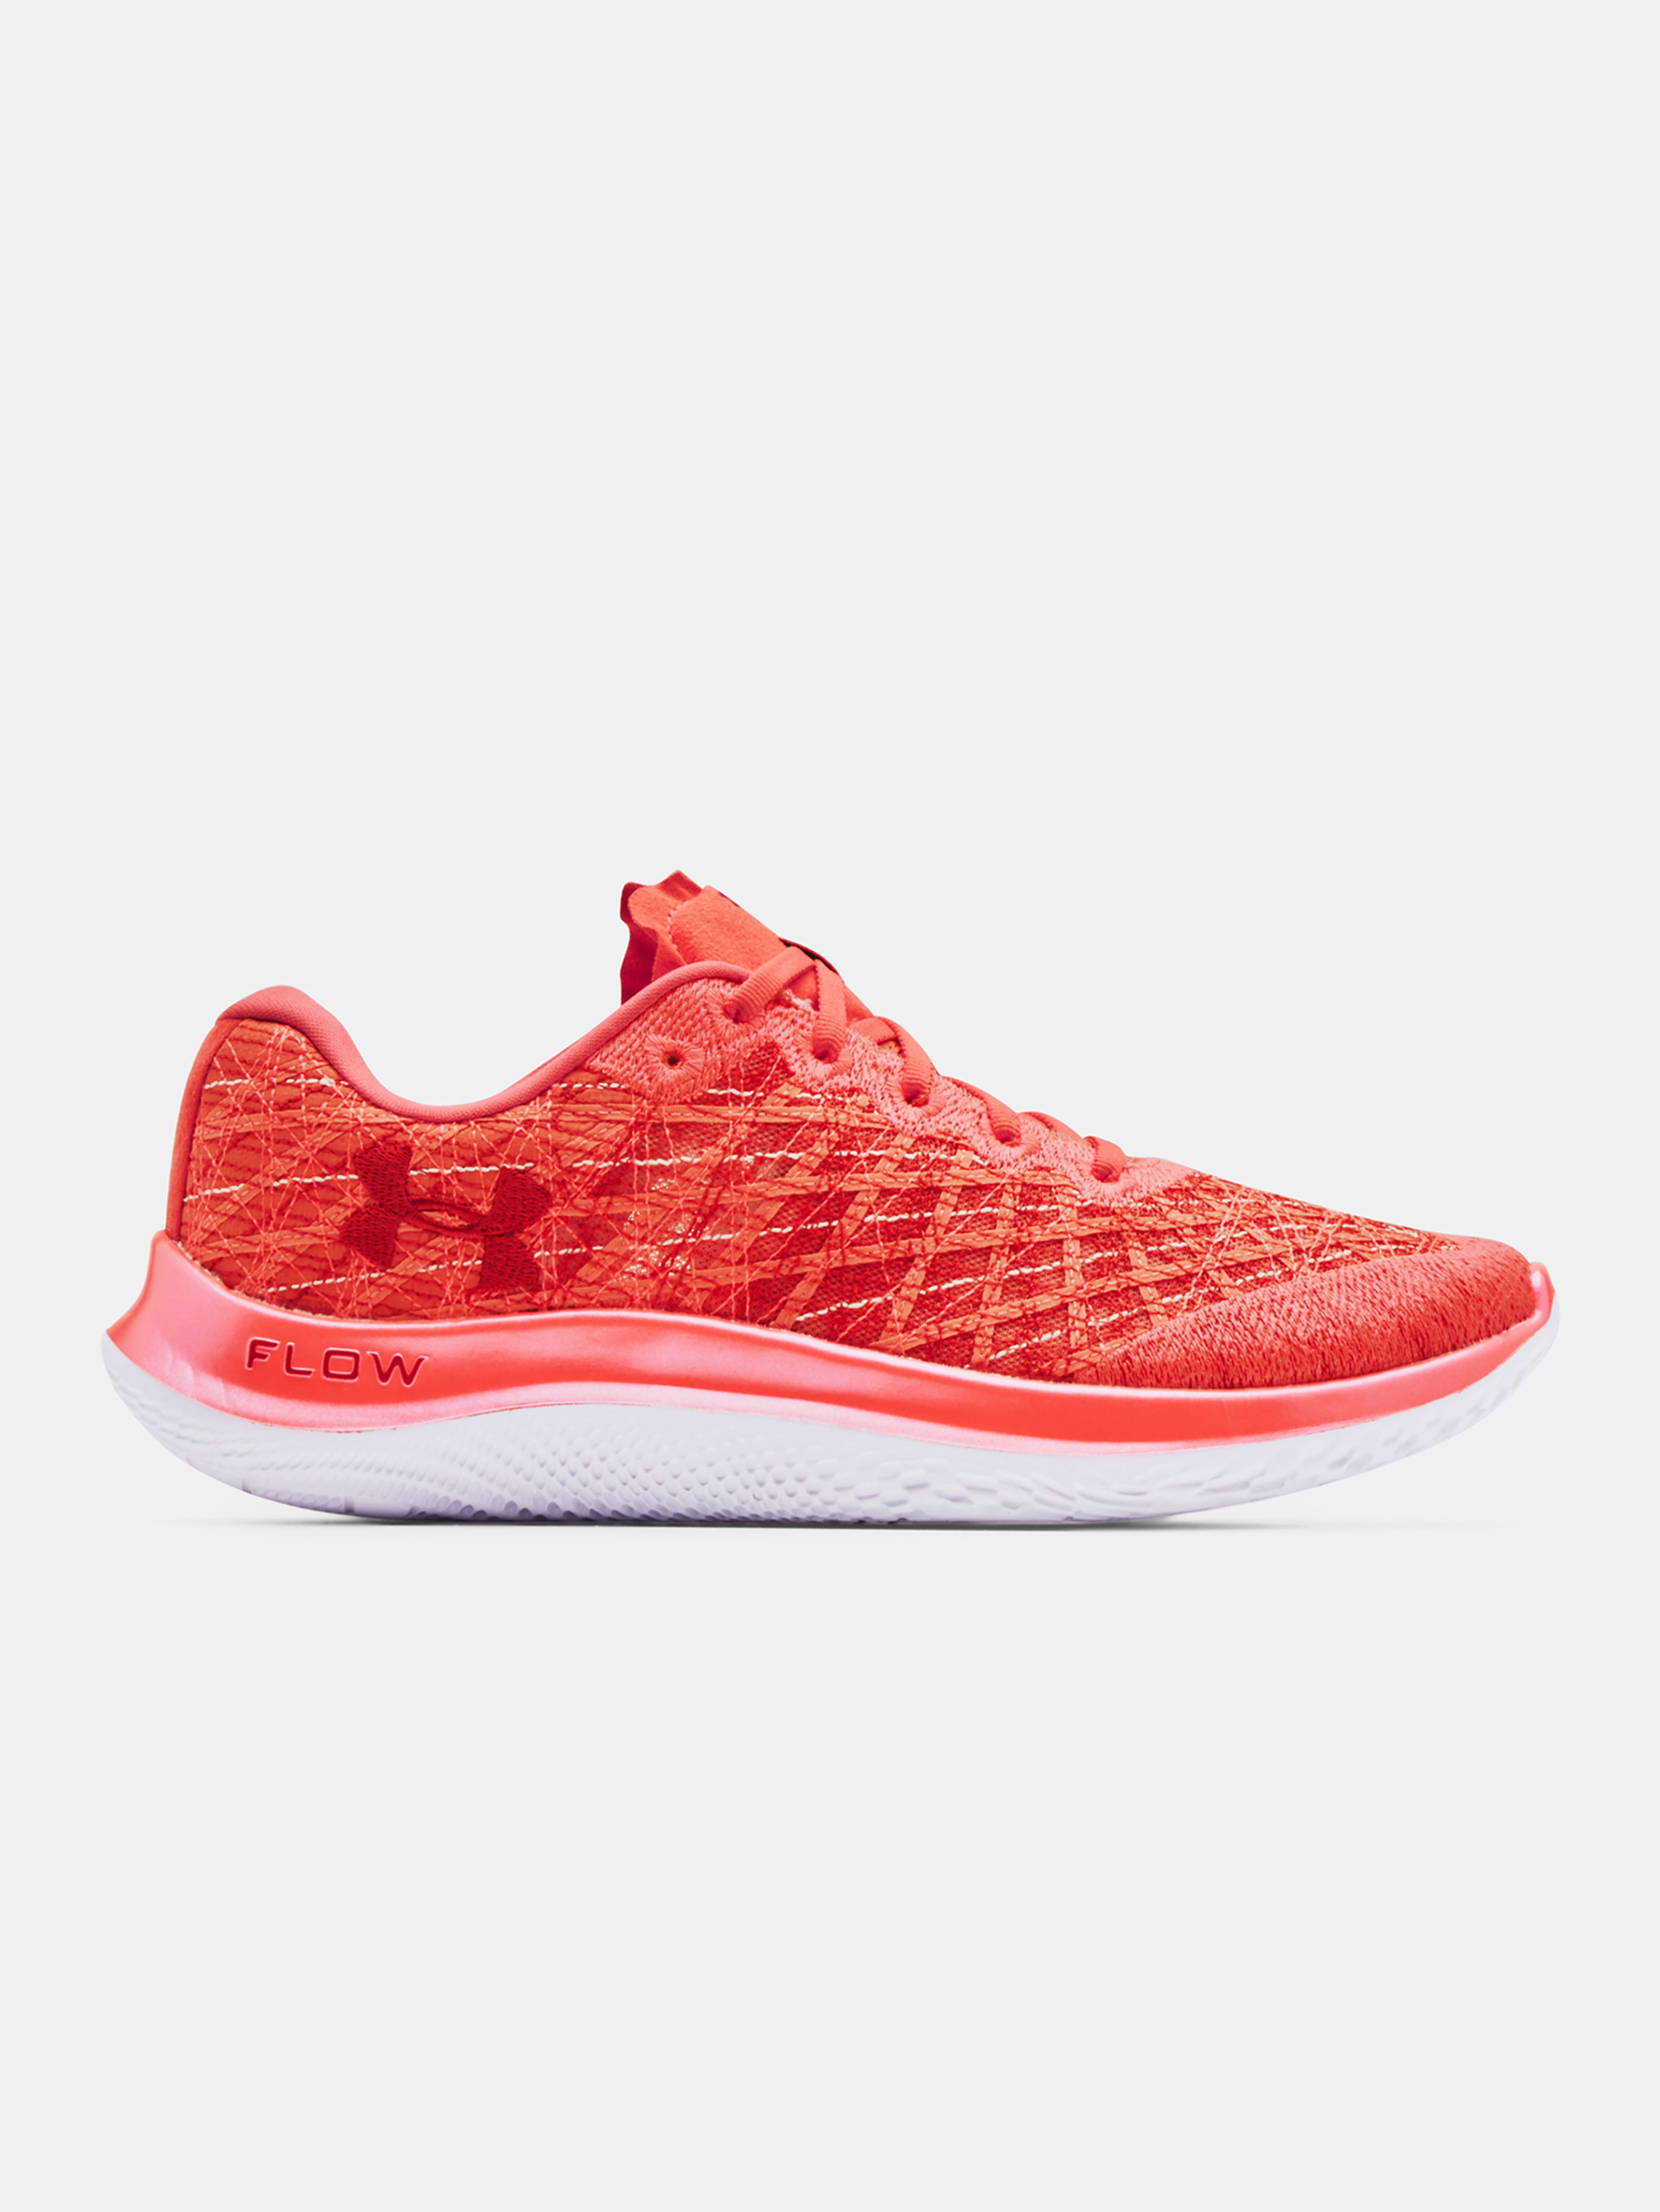 Topánky Under Armour FLOW Velociti Wind-RED